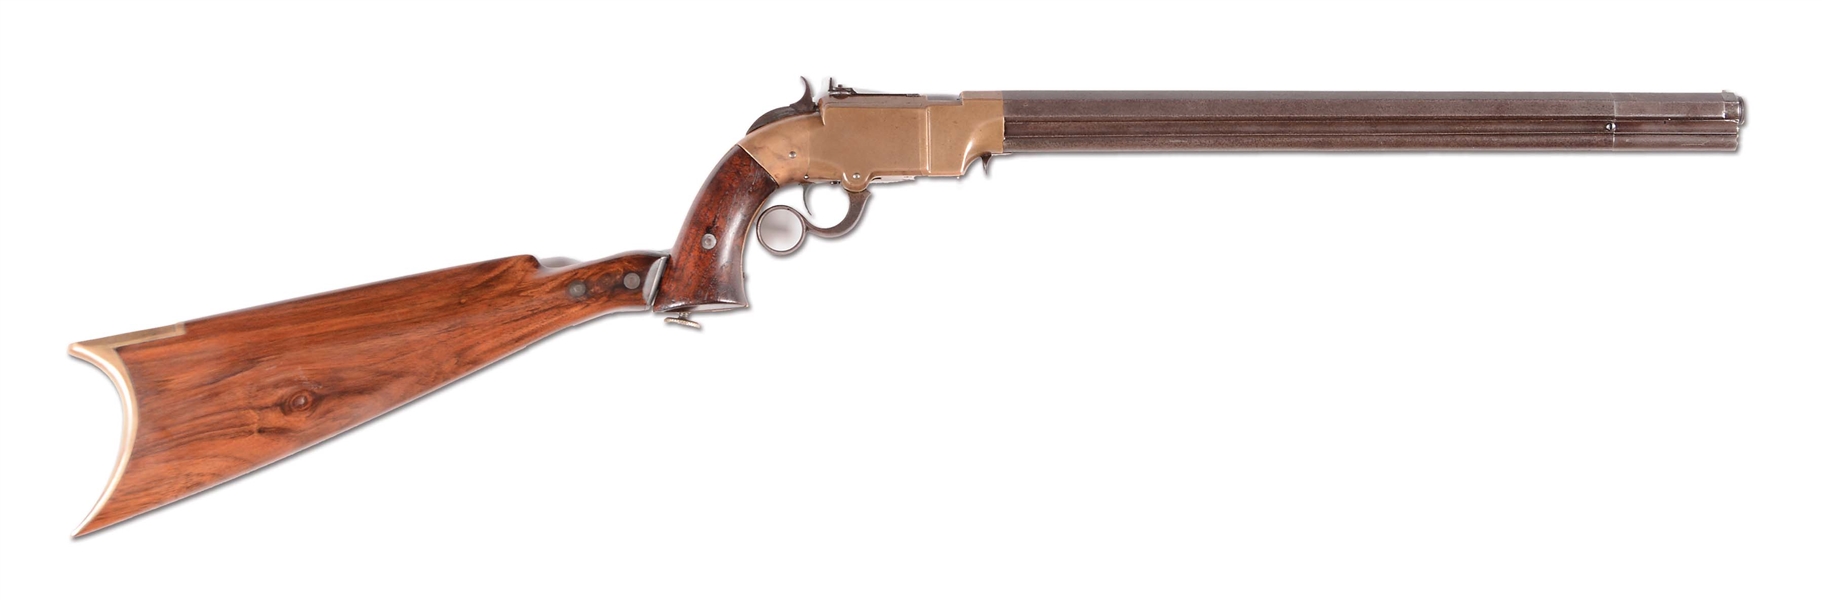 (A) RARE AND IMPORTANT VOLCANIC LEVER ACTION PISTOL/CARBINE SERIAL NUMBER 1